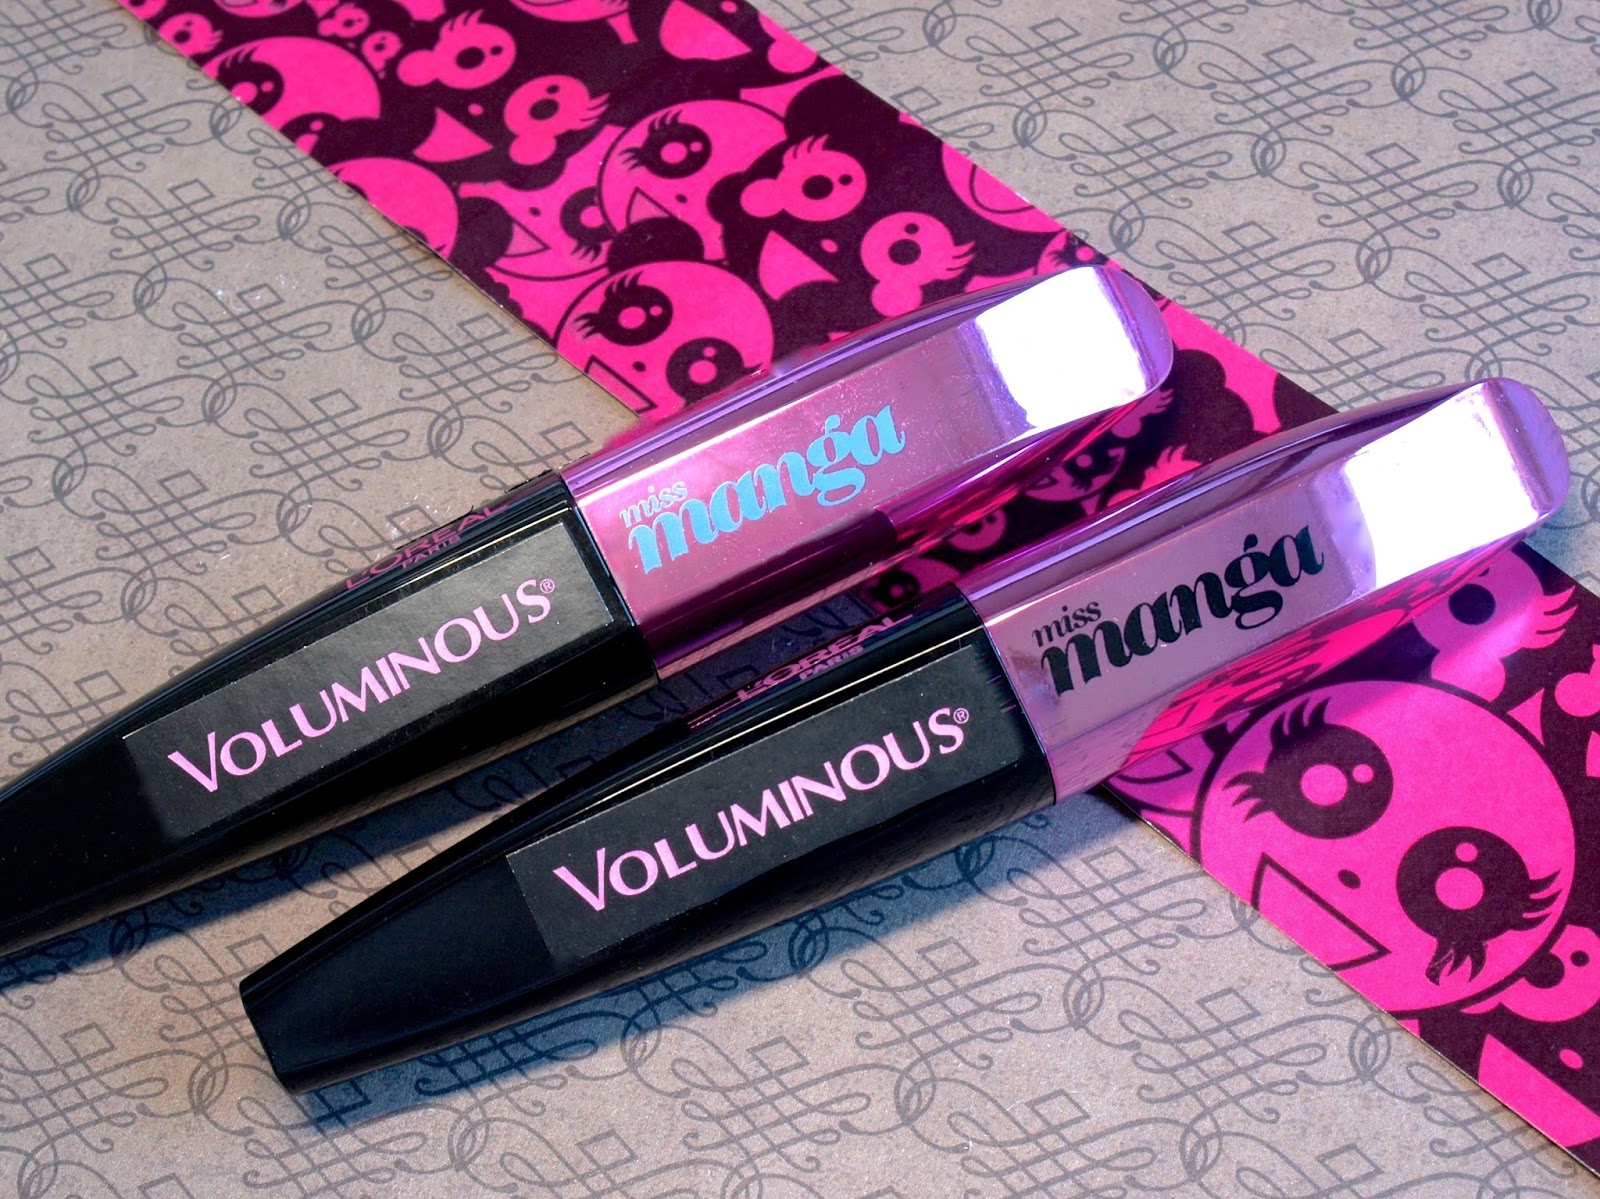 L'Oreal Miss Manga Mascara in "Black" & "Turquoise": Review and Swatches